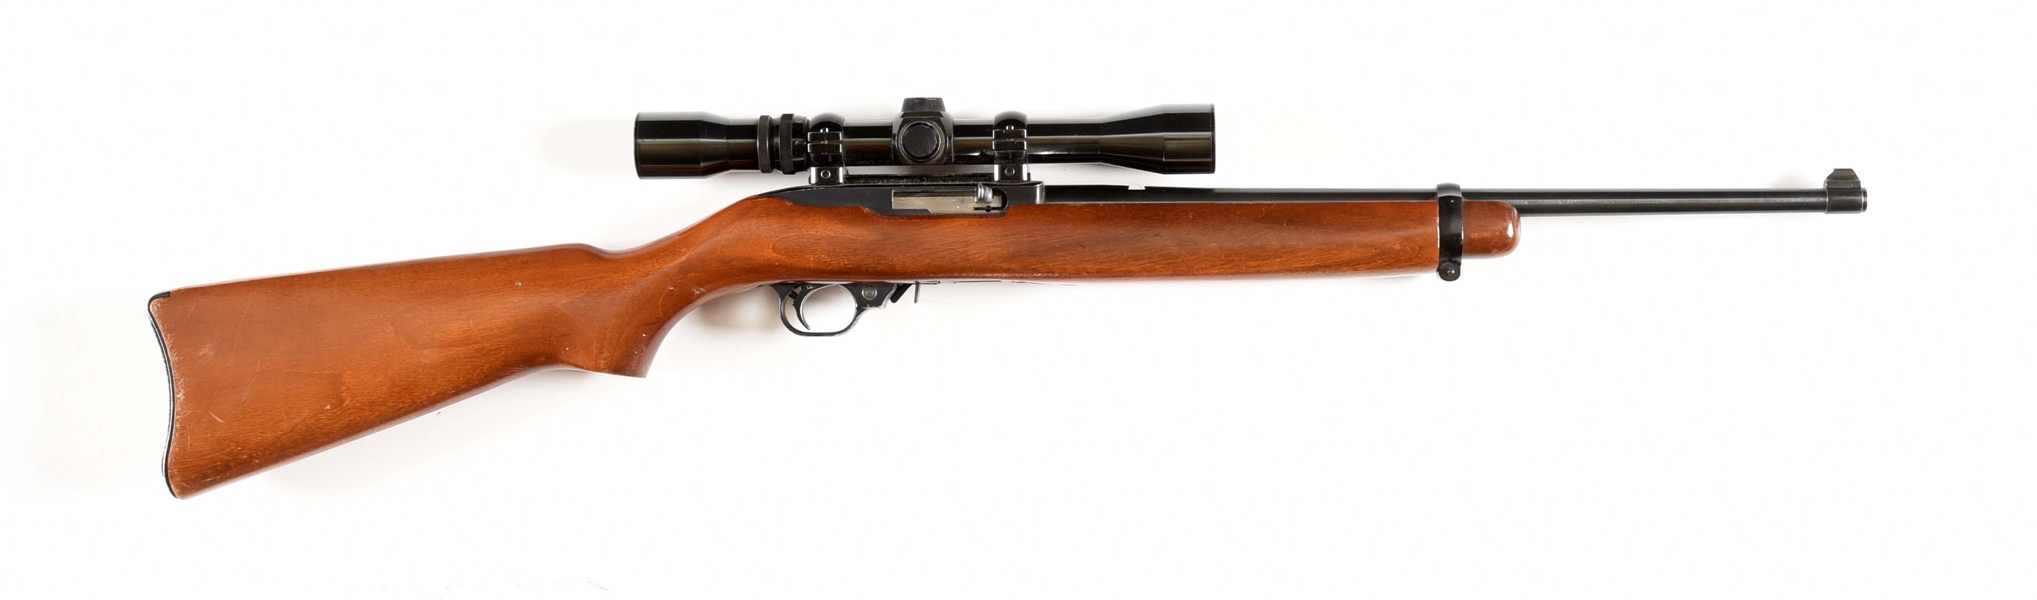 (M) RUGER MODEL 10/22 SEMI AUTOMATIC RIFLE.